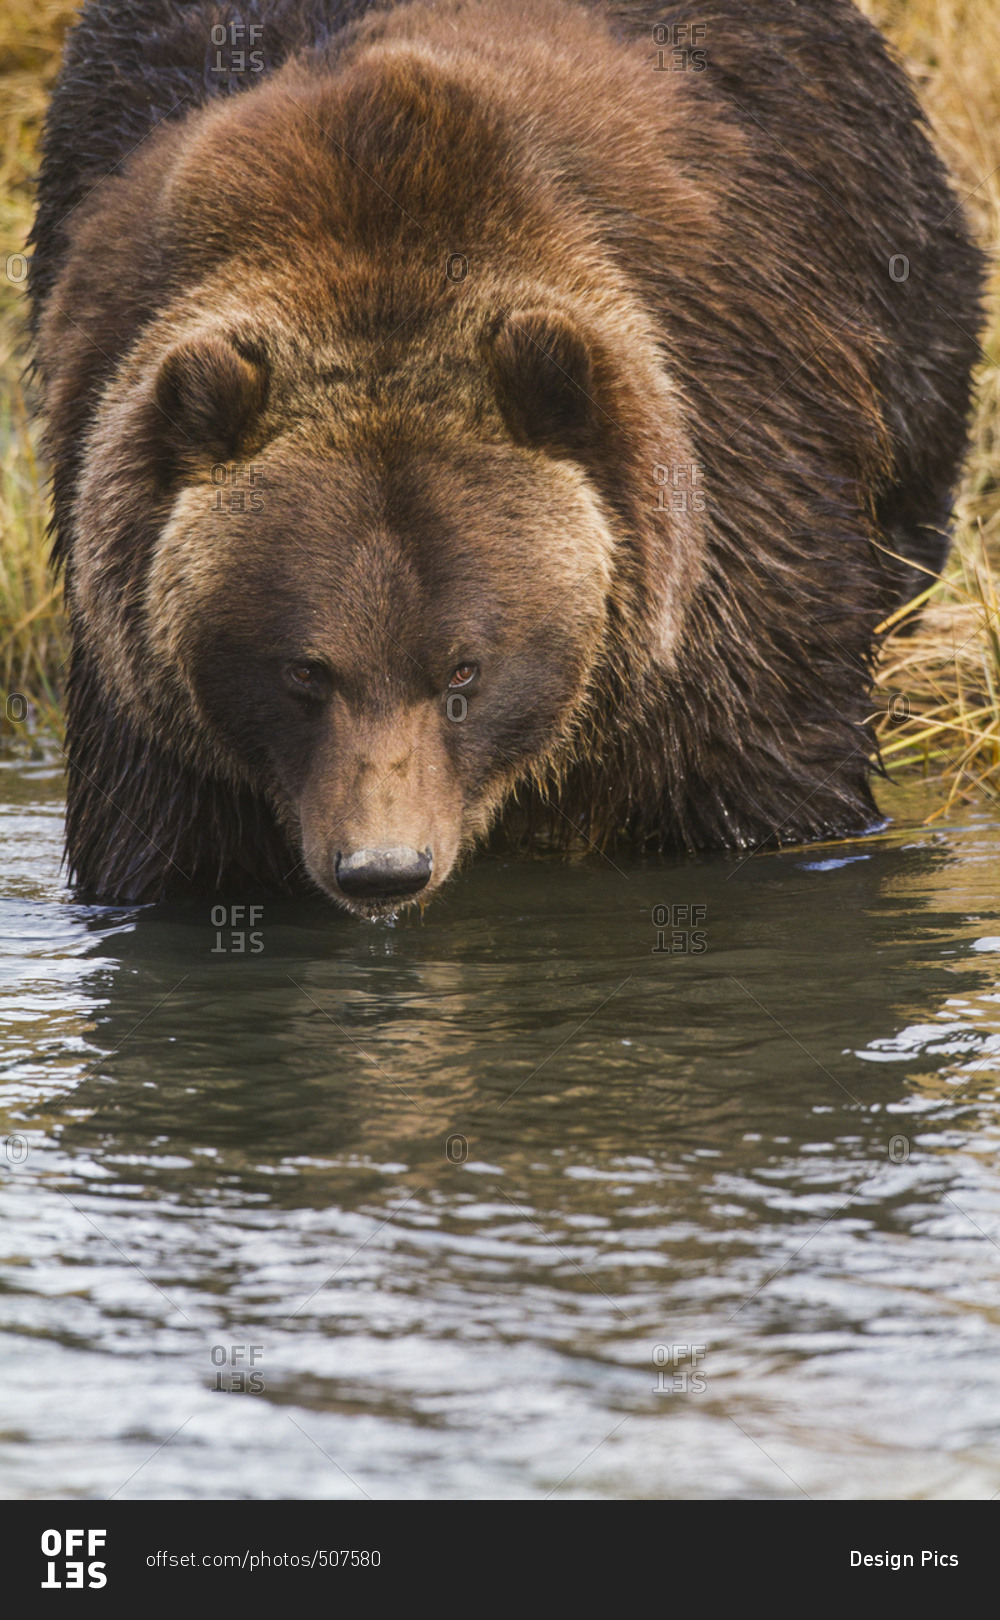 Captive Grizzly bear (ursus arctos horribilis) in autumn at the Alaska Wildlife Conservation Center, looking at camera while crossing small pond; Portage, Alaska, United States of America